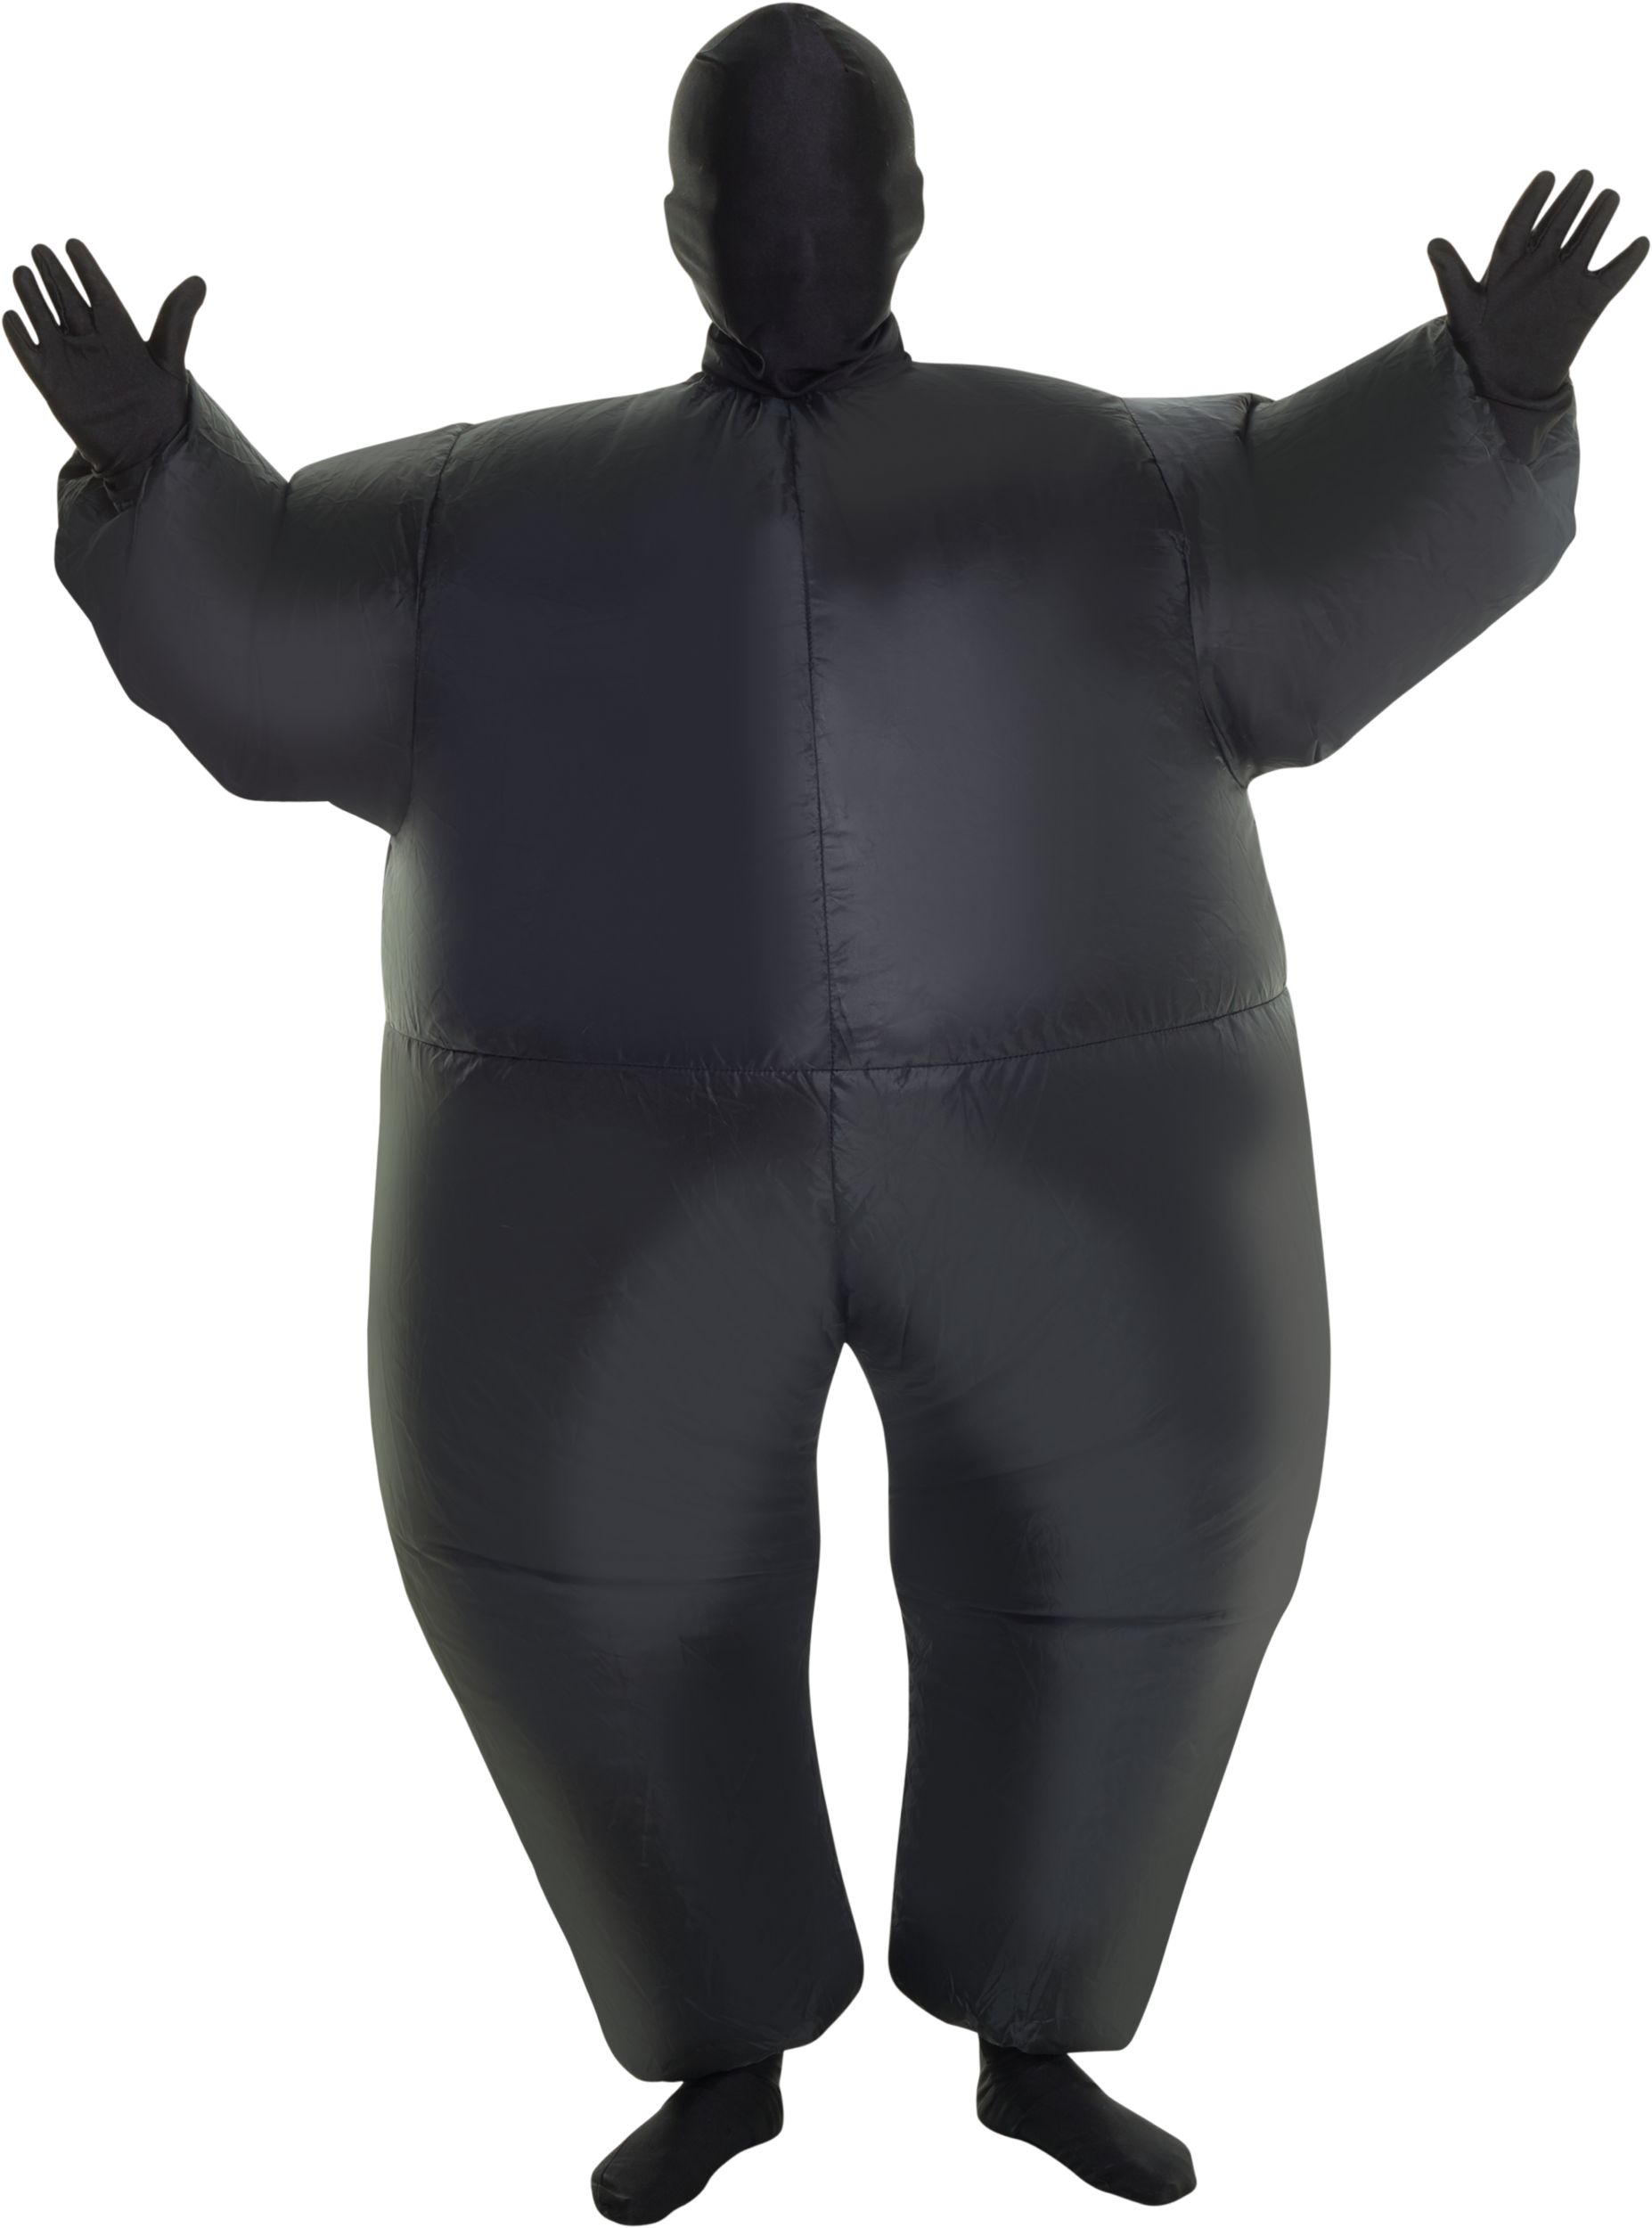 Kids' Black Inflatable Morphsuit Halloween Costume, One Size